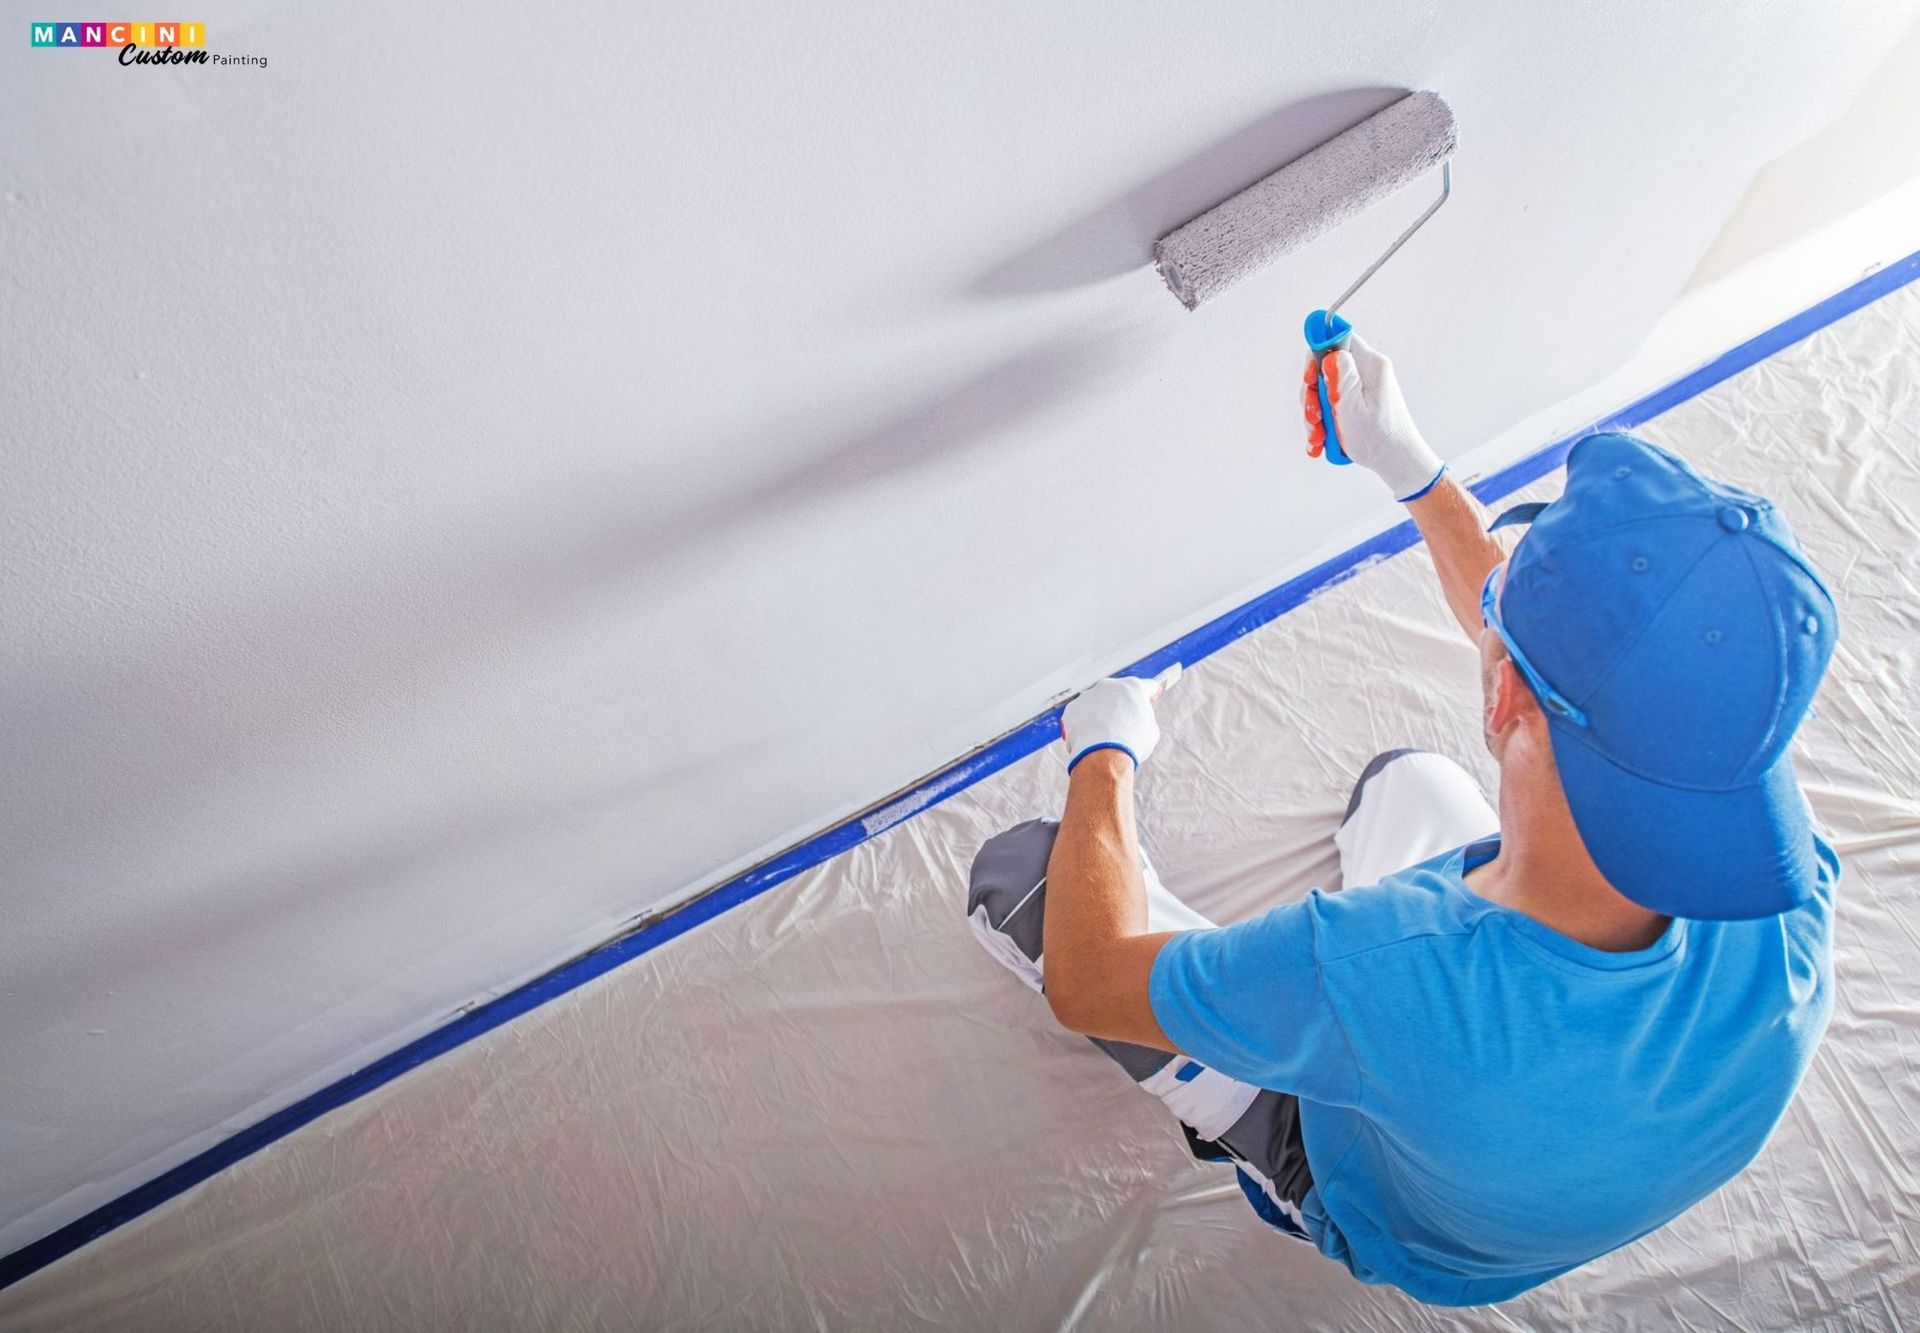 Quality home painting by professional painting contractors